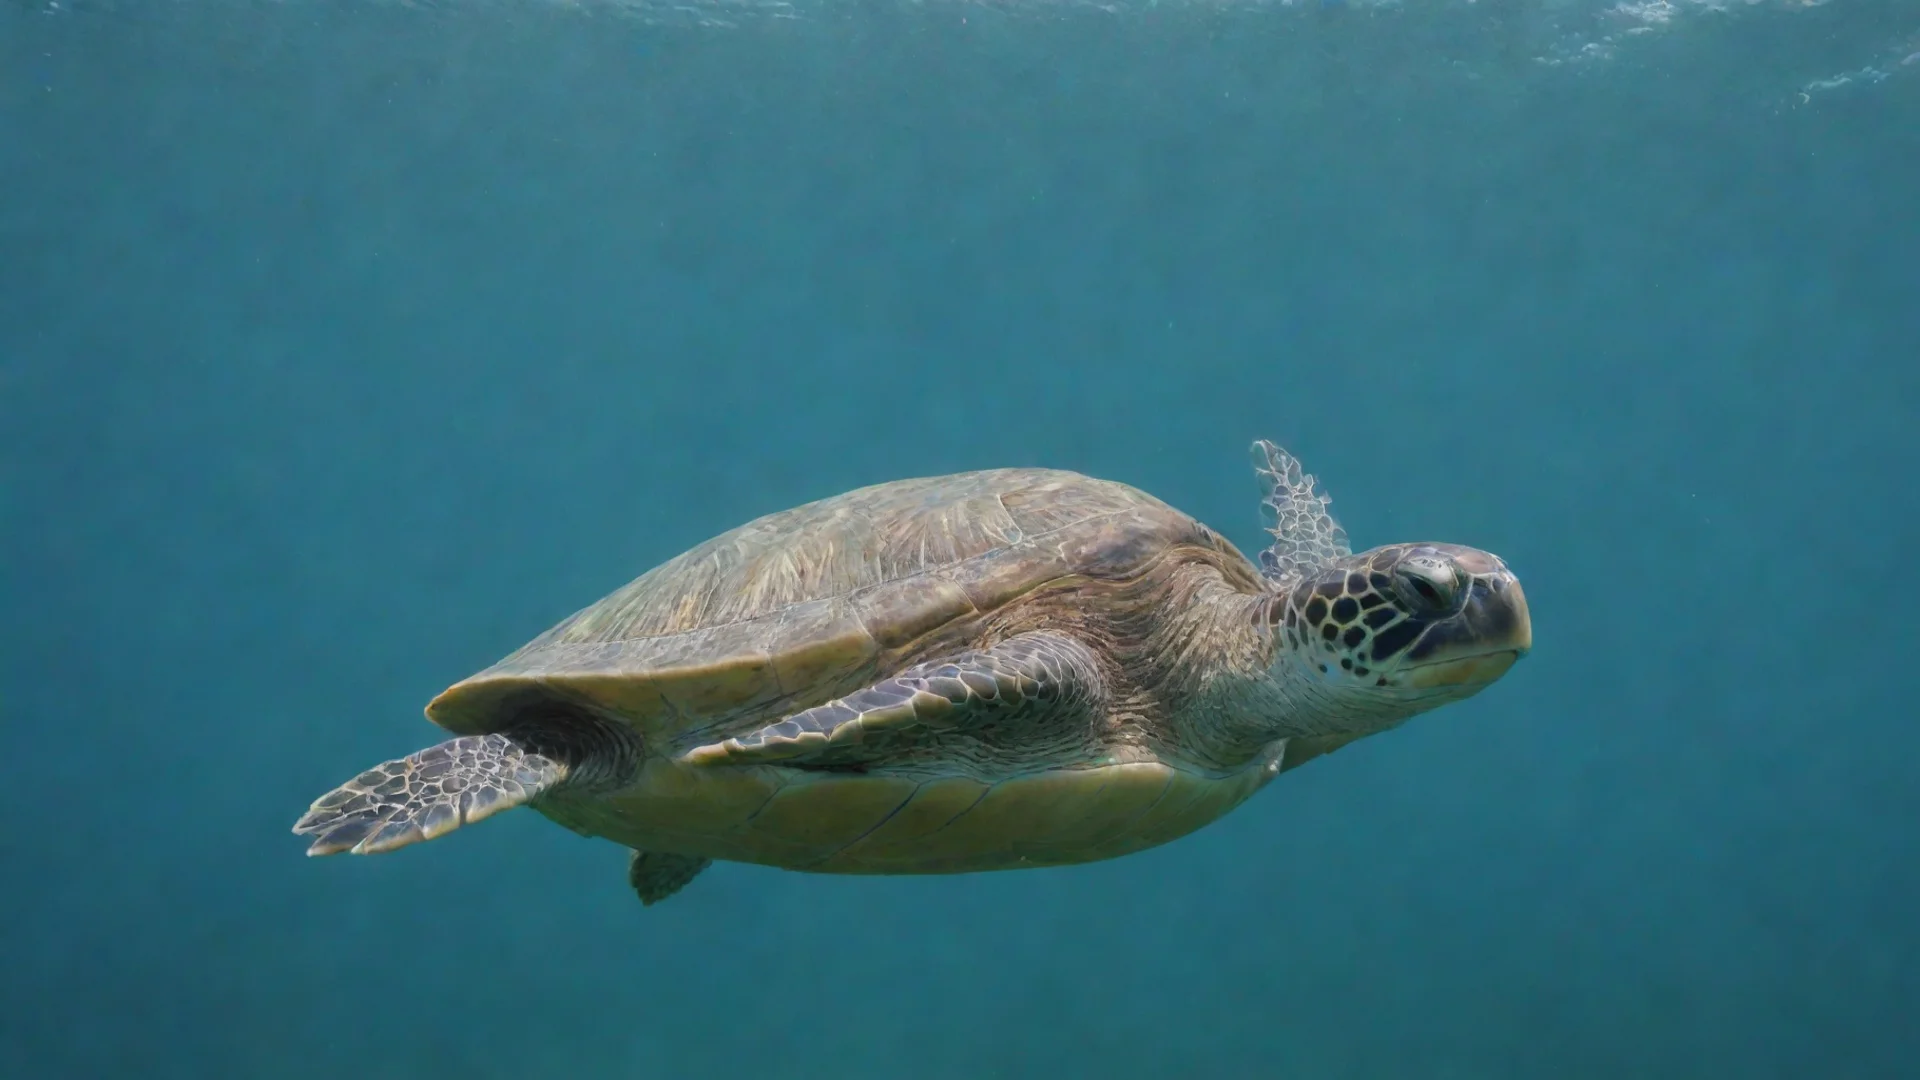 aiamazing turtle swims through the air awesome portrait 2 wide